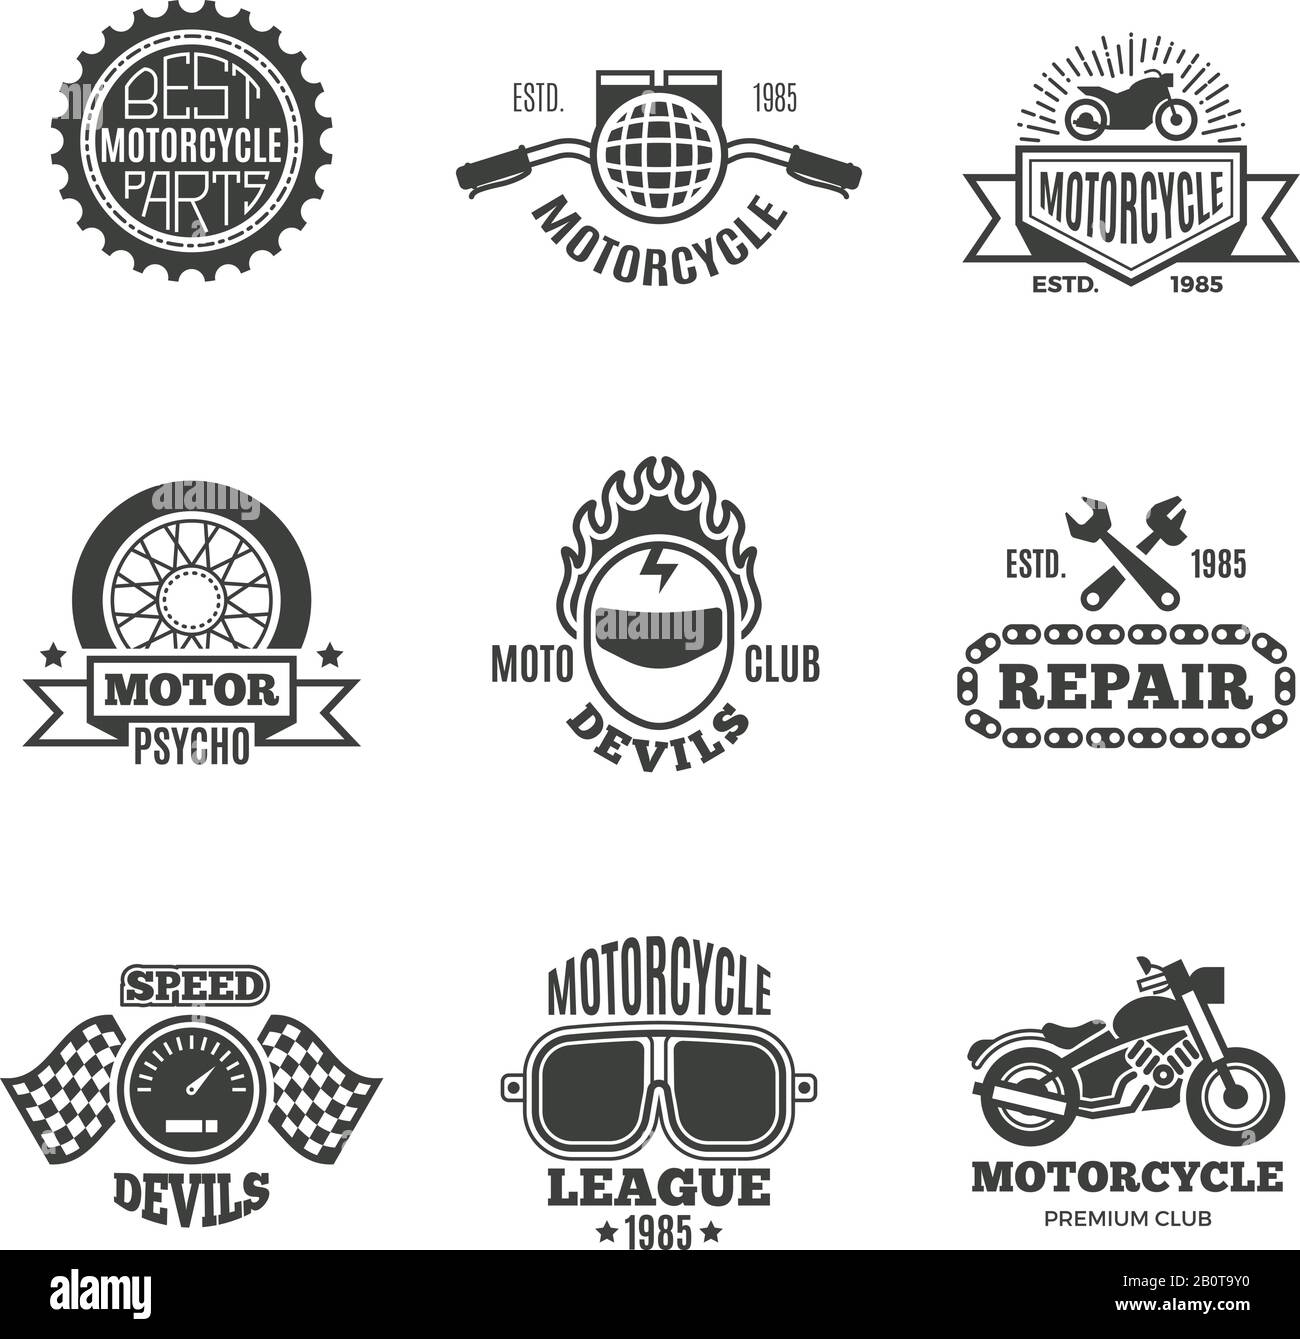 Race, motorcycle, motorbike repair vector retro labels, logo, badges and emblems. Motorbike service badge, illustration of label with motorbike Stock Vector